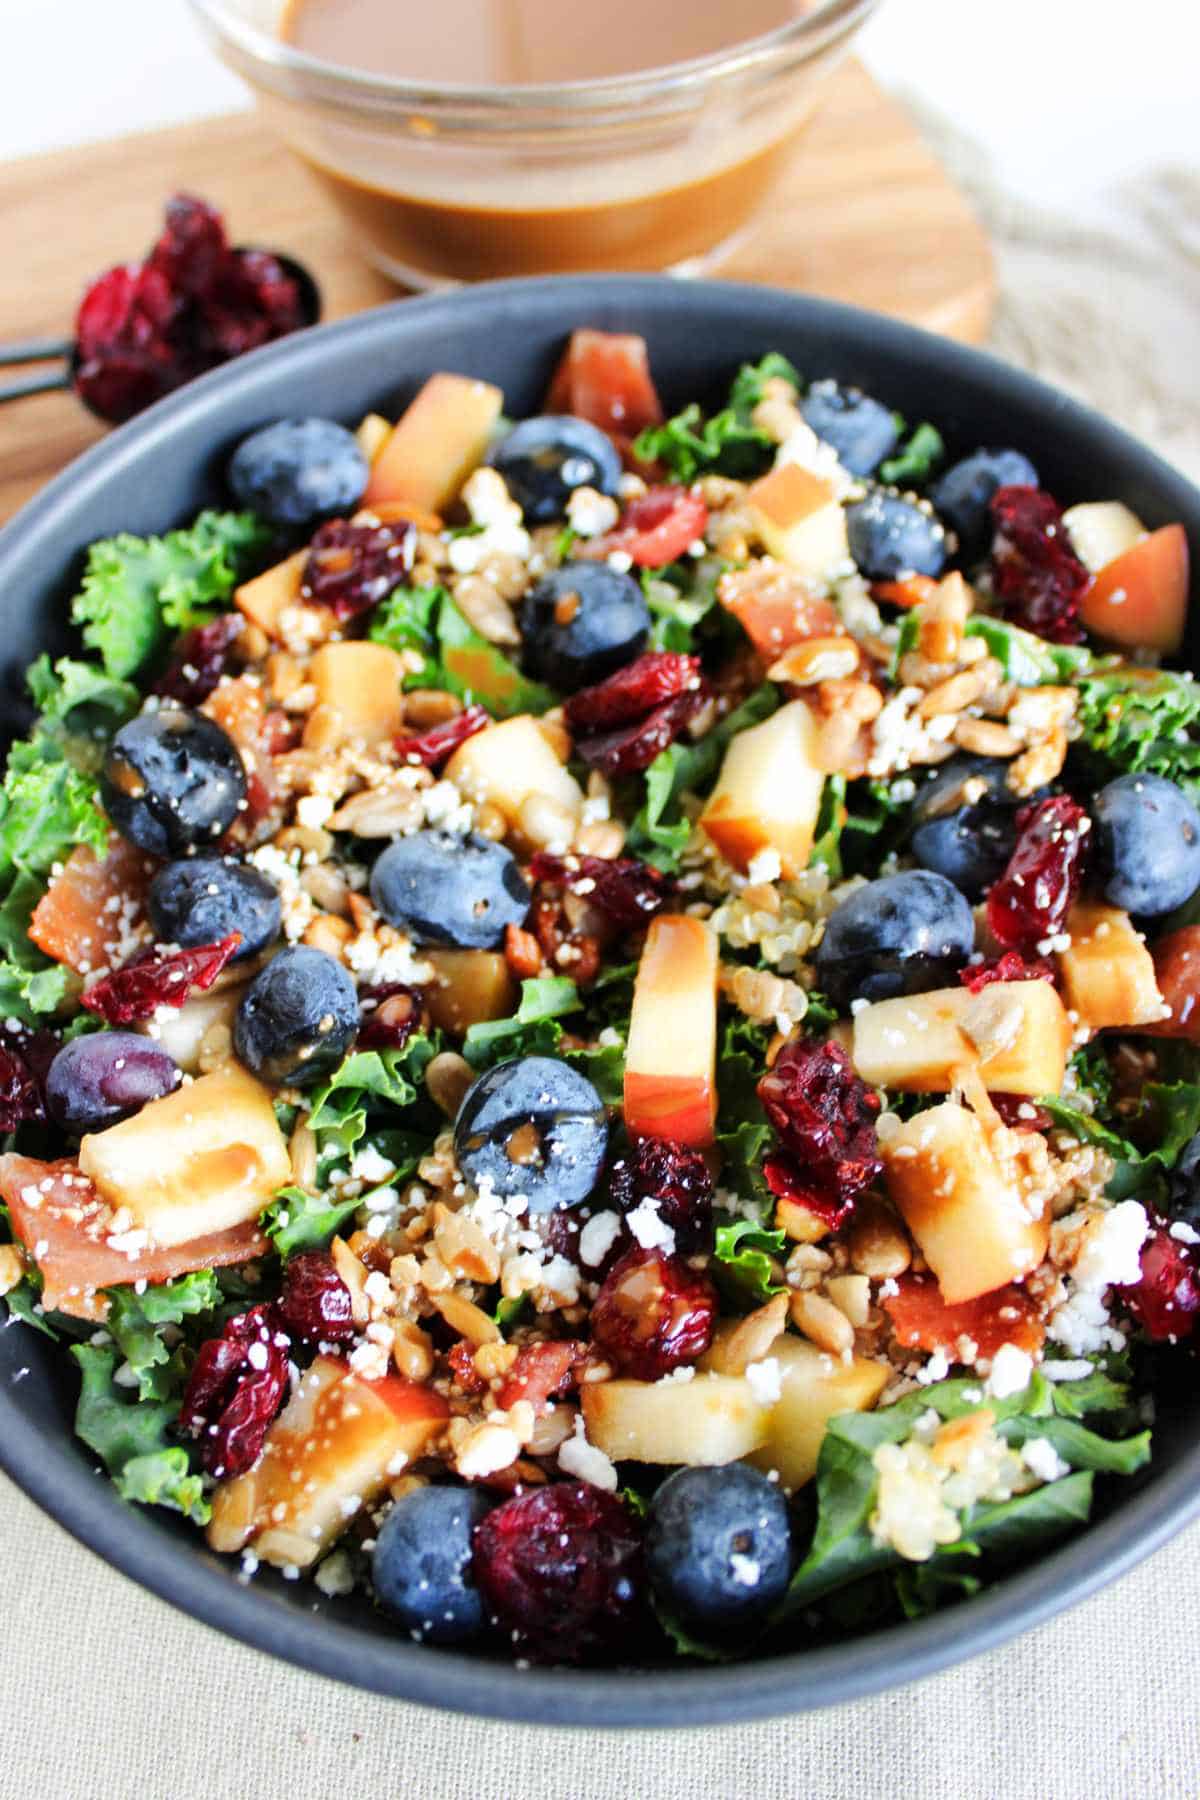 blueberry kale crunch salad in a bowl with feta cheese crumbled on top.